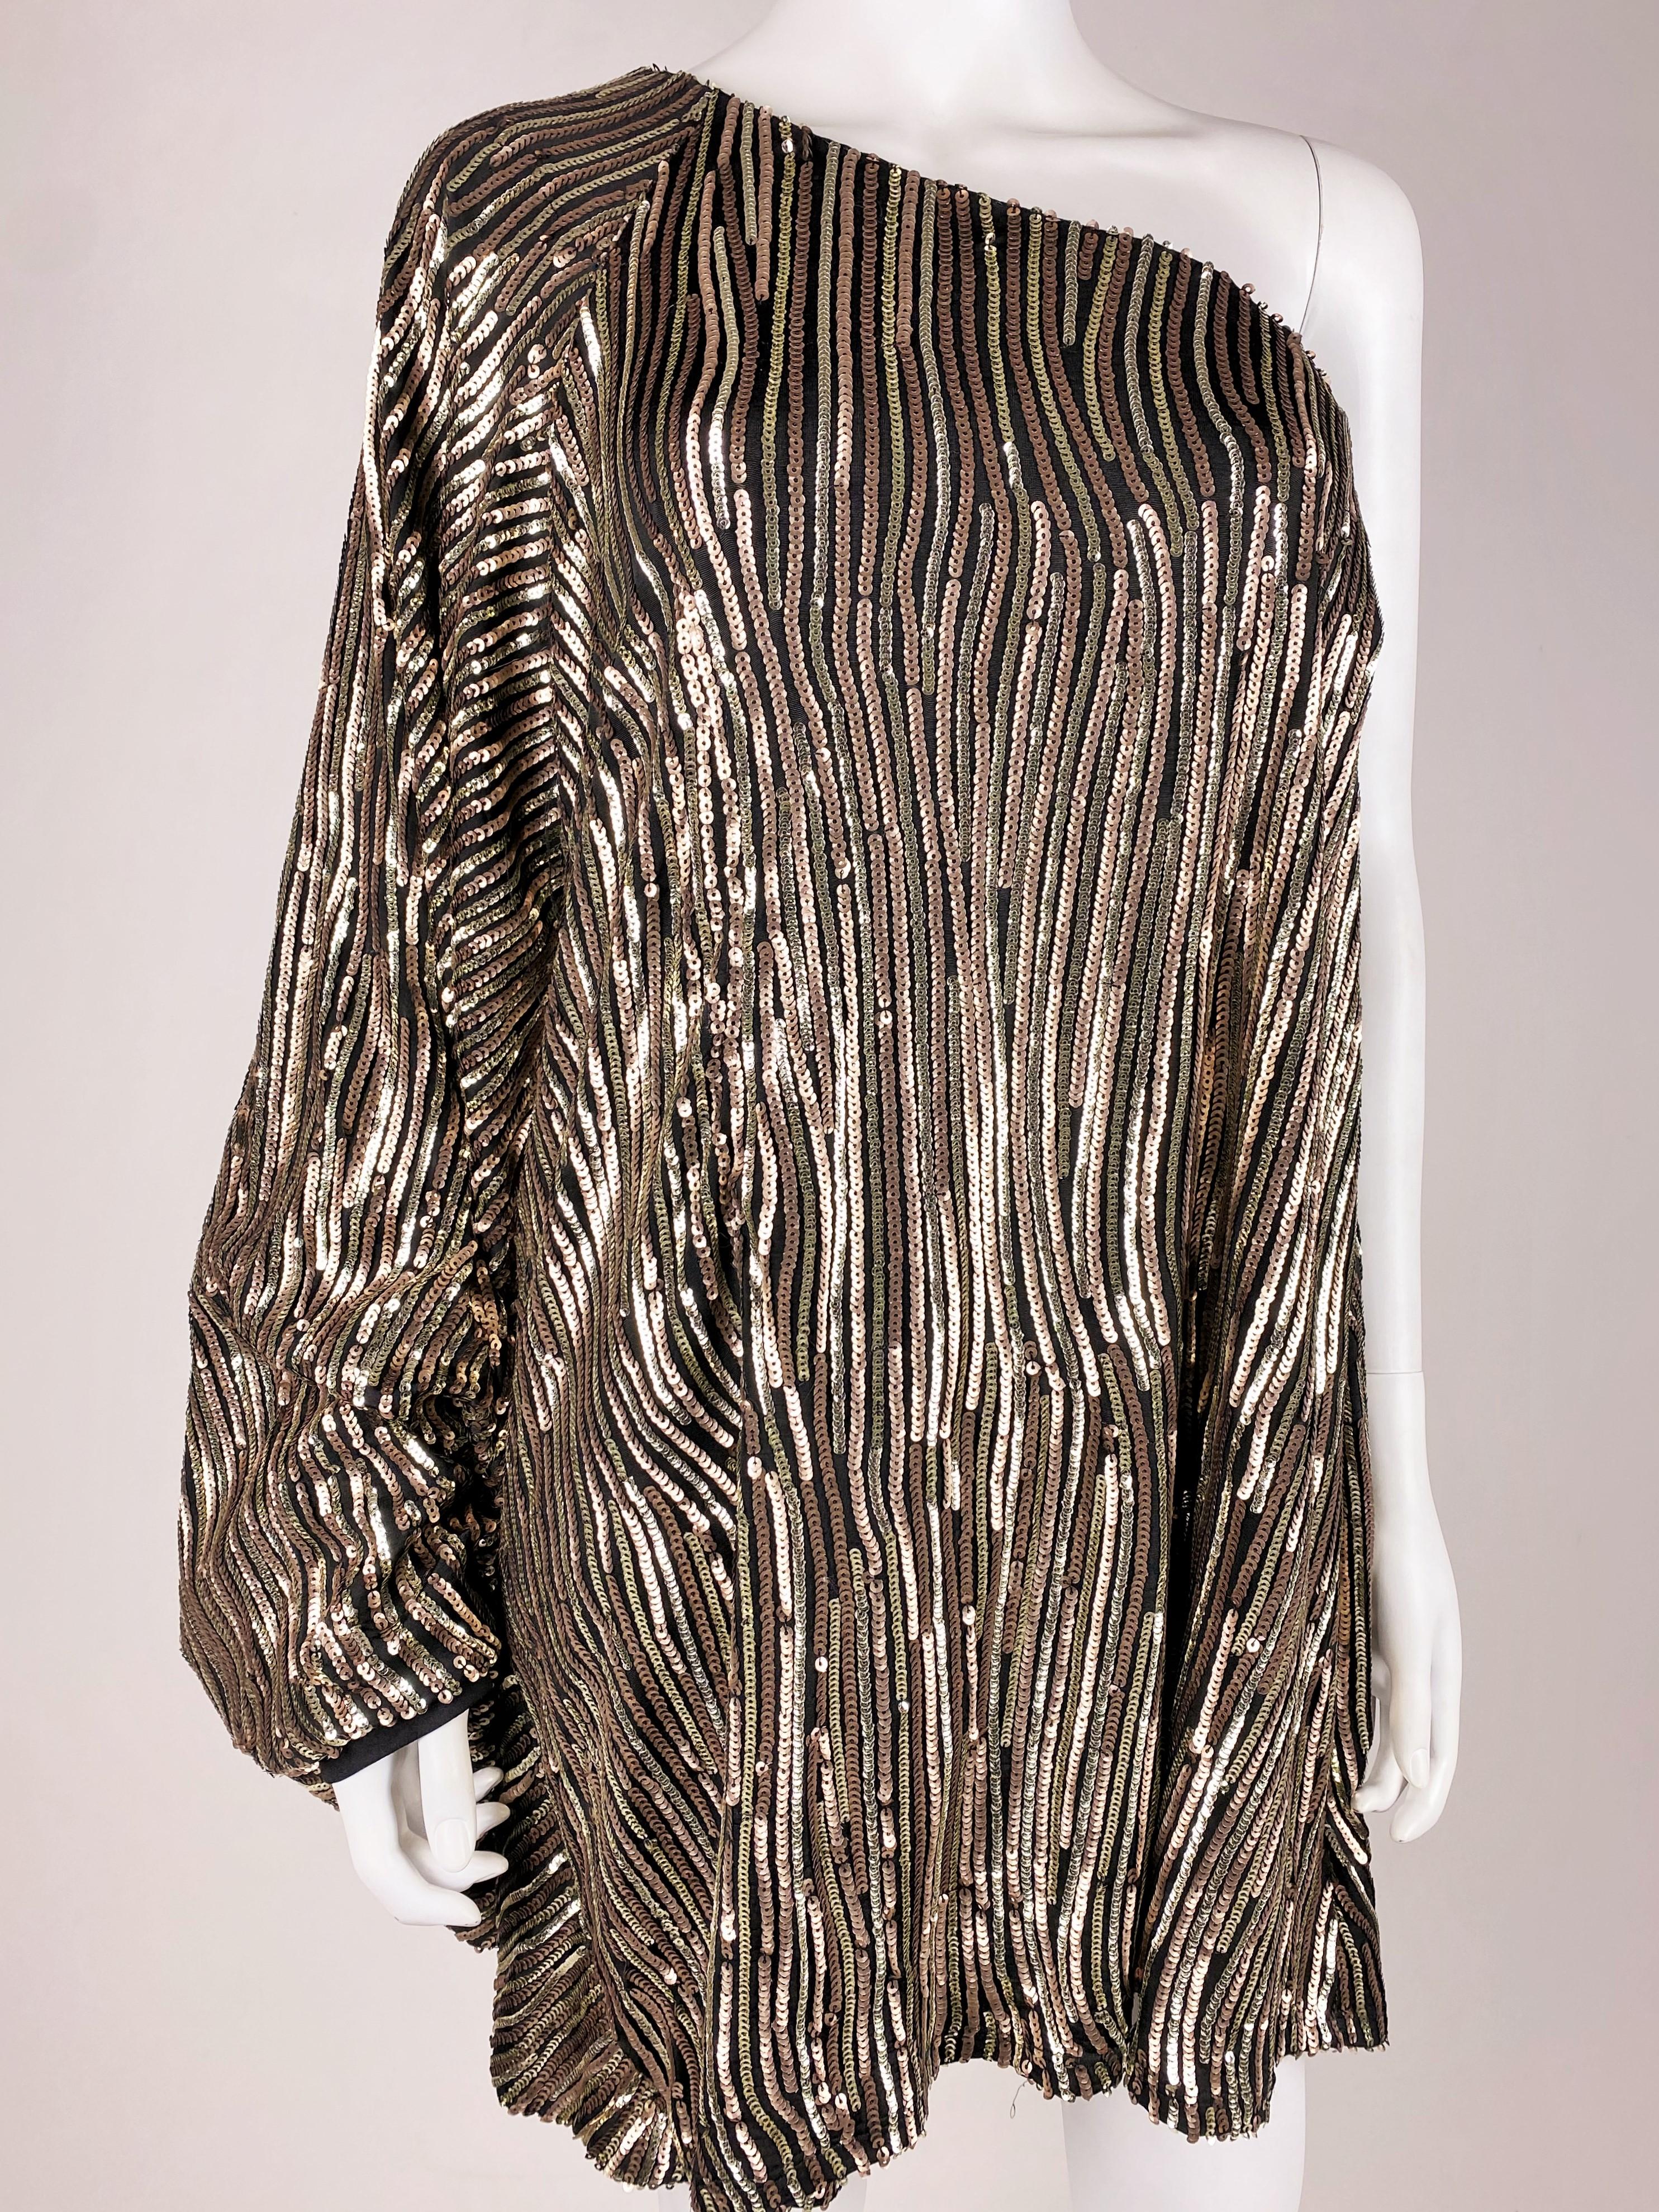 A Sequin top or mini-dress with bat handle For a Party - France Circa 1980 For Sale 3